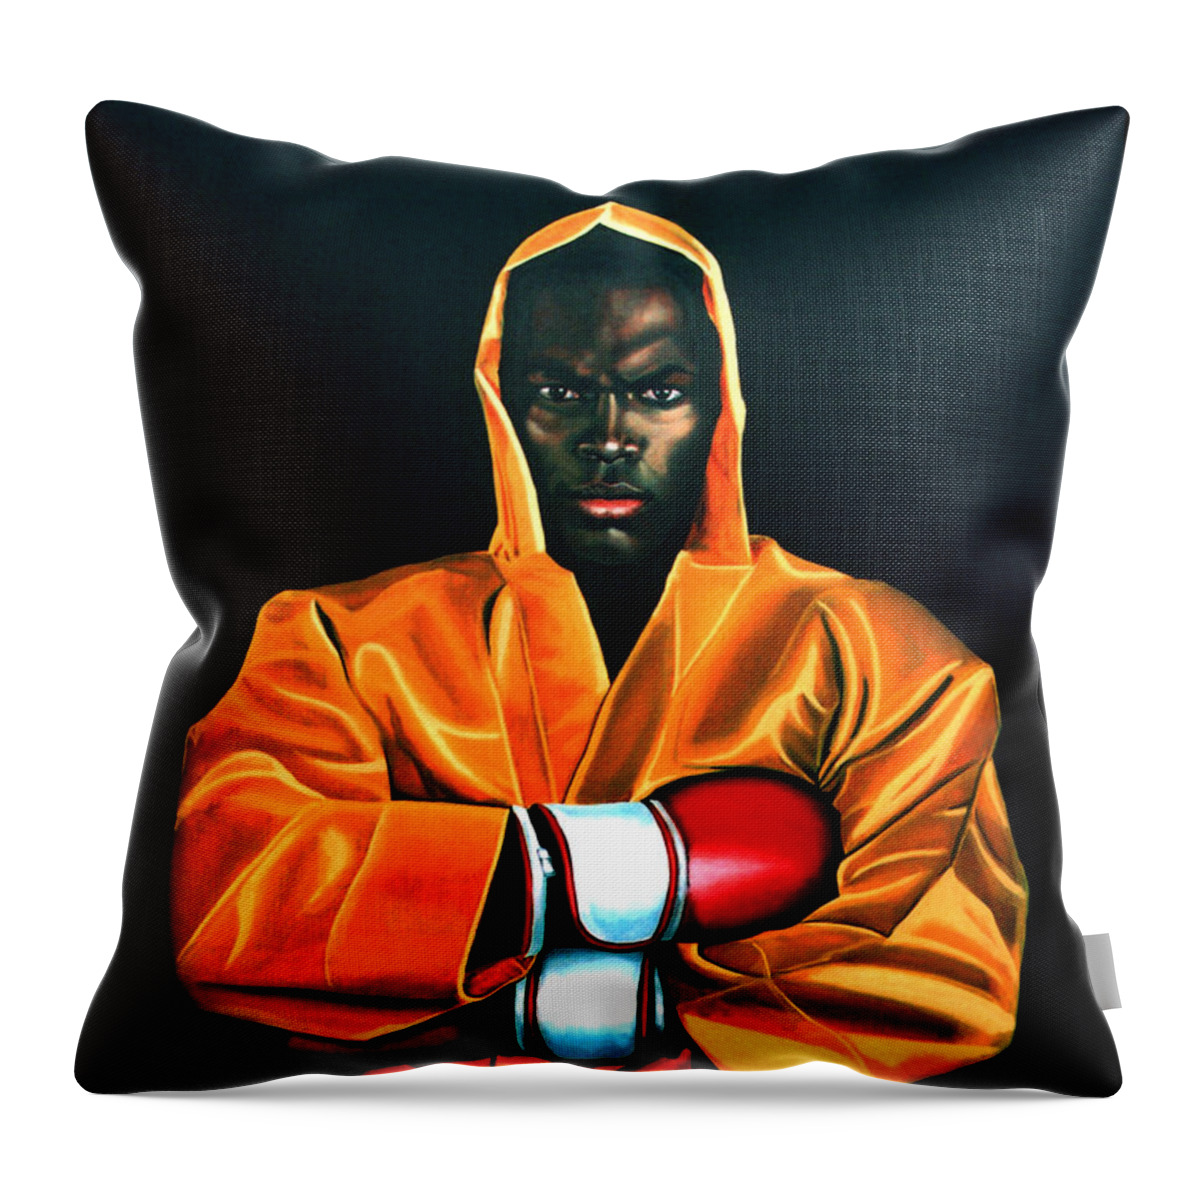 Remy Bonjasky Throw Pillow featuring the painting Remy Bonjasky by Paul Meijering